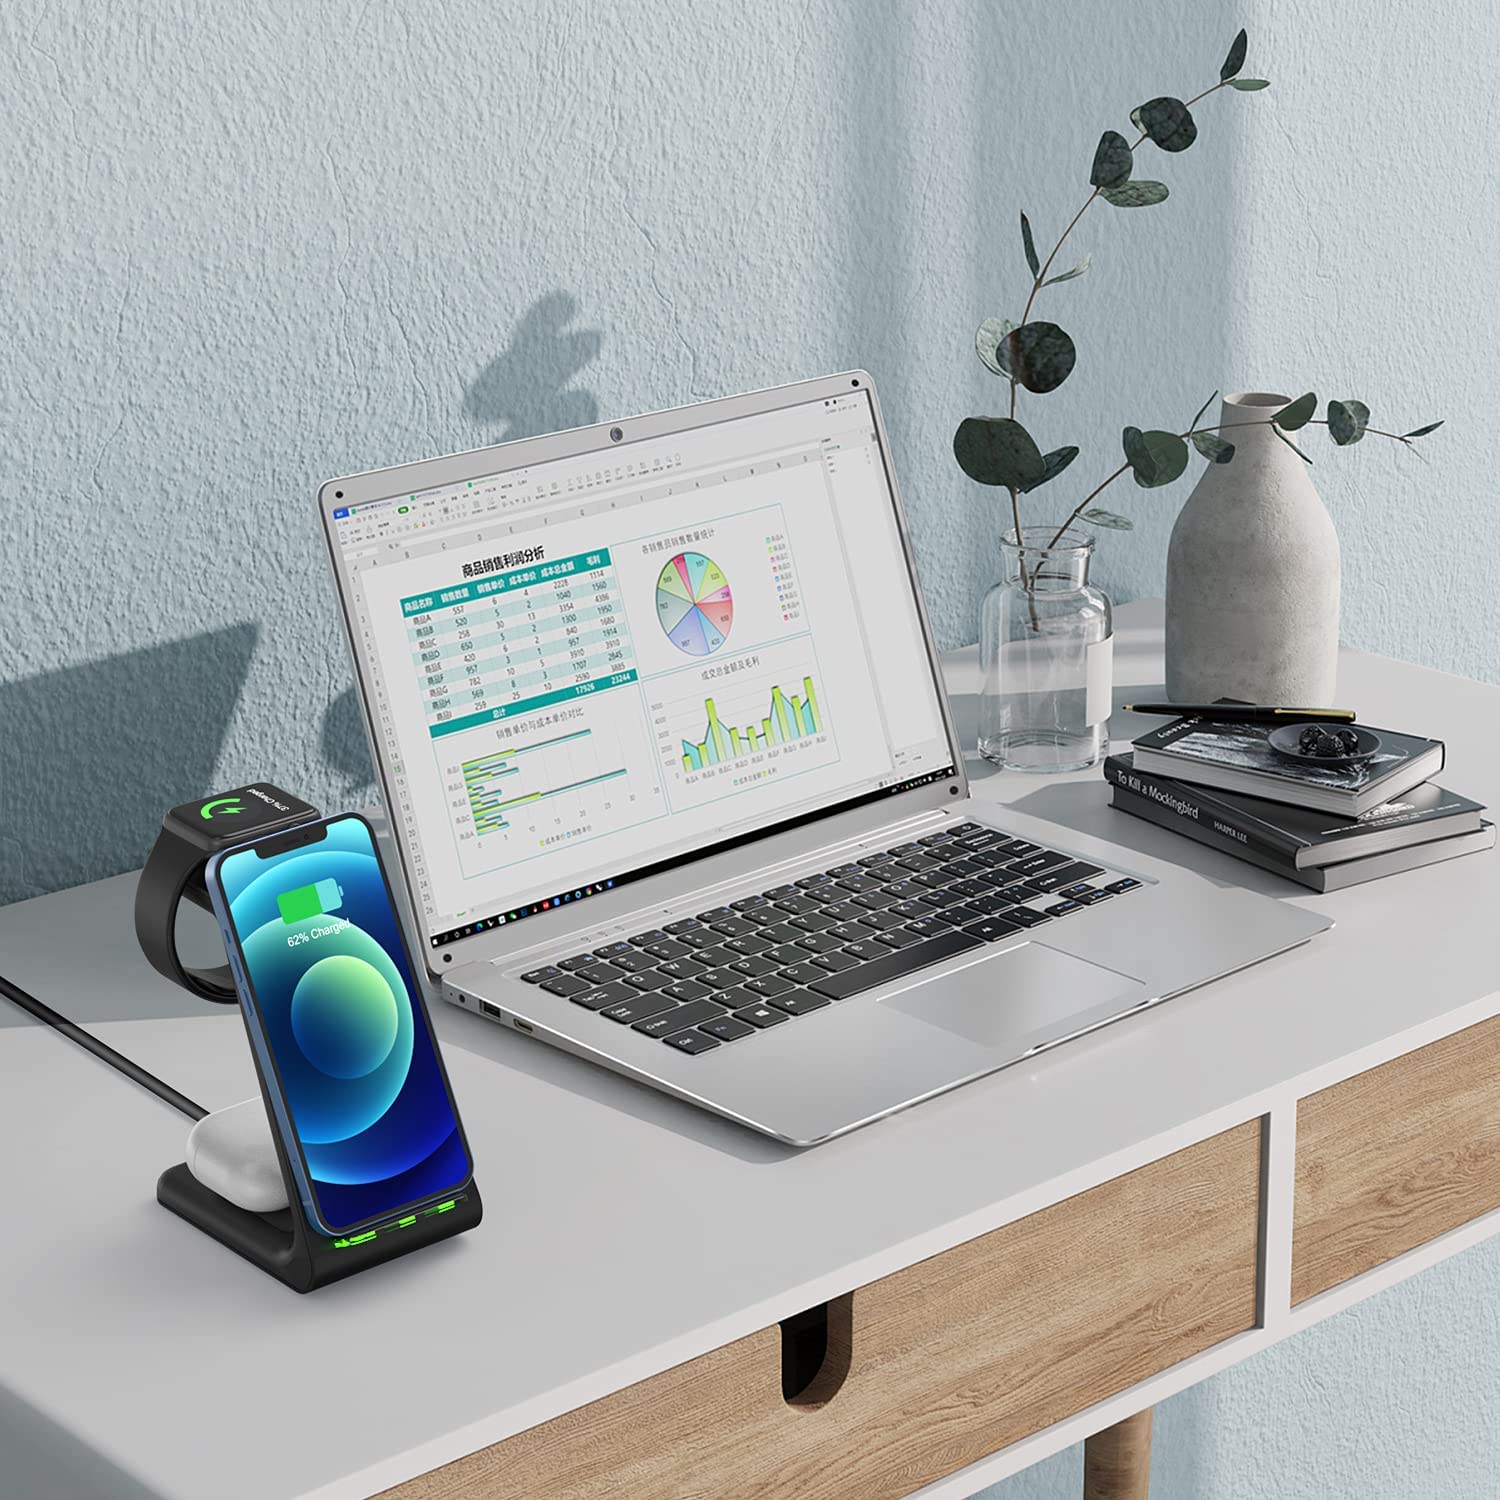 Amp Charge™ 3 IN 1 WIRELESS CHARGER